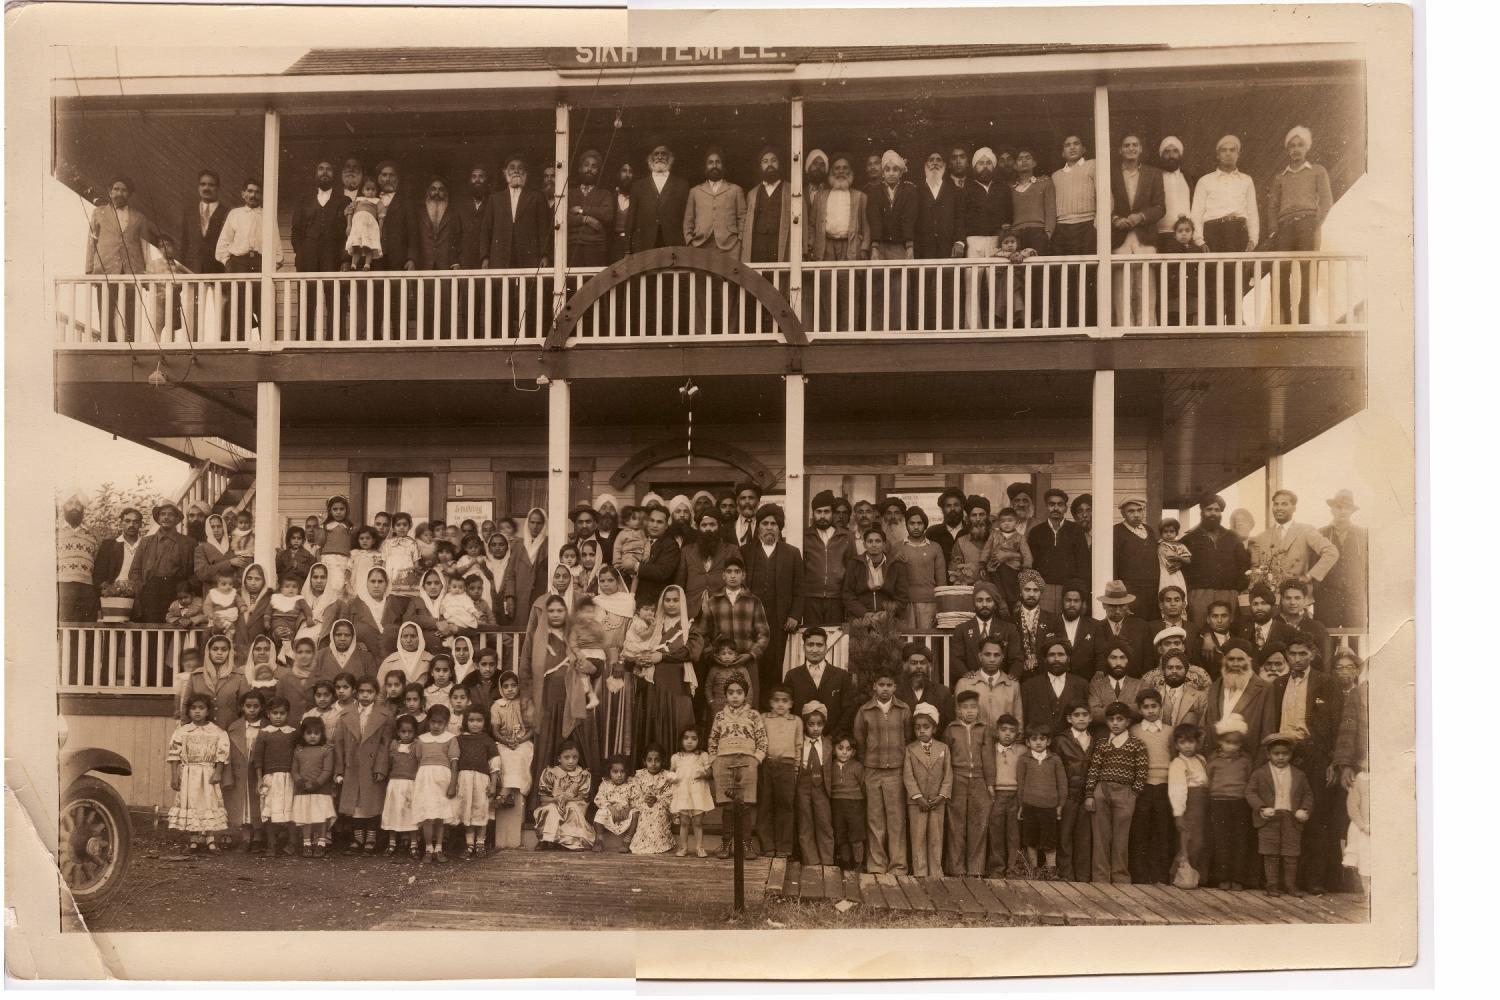 Big group photo outside Paldi's Sikh temple in 1936.